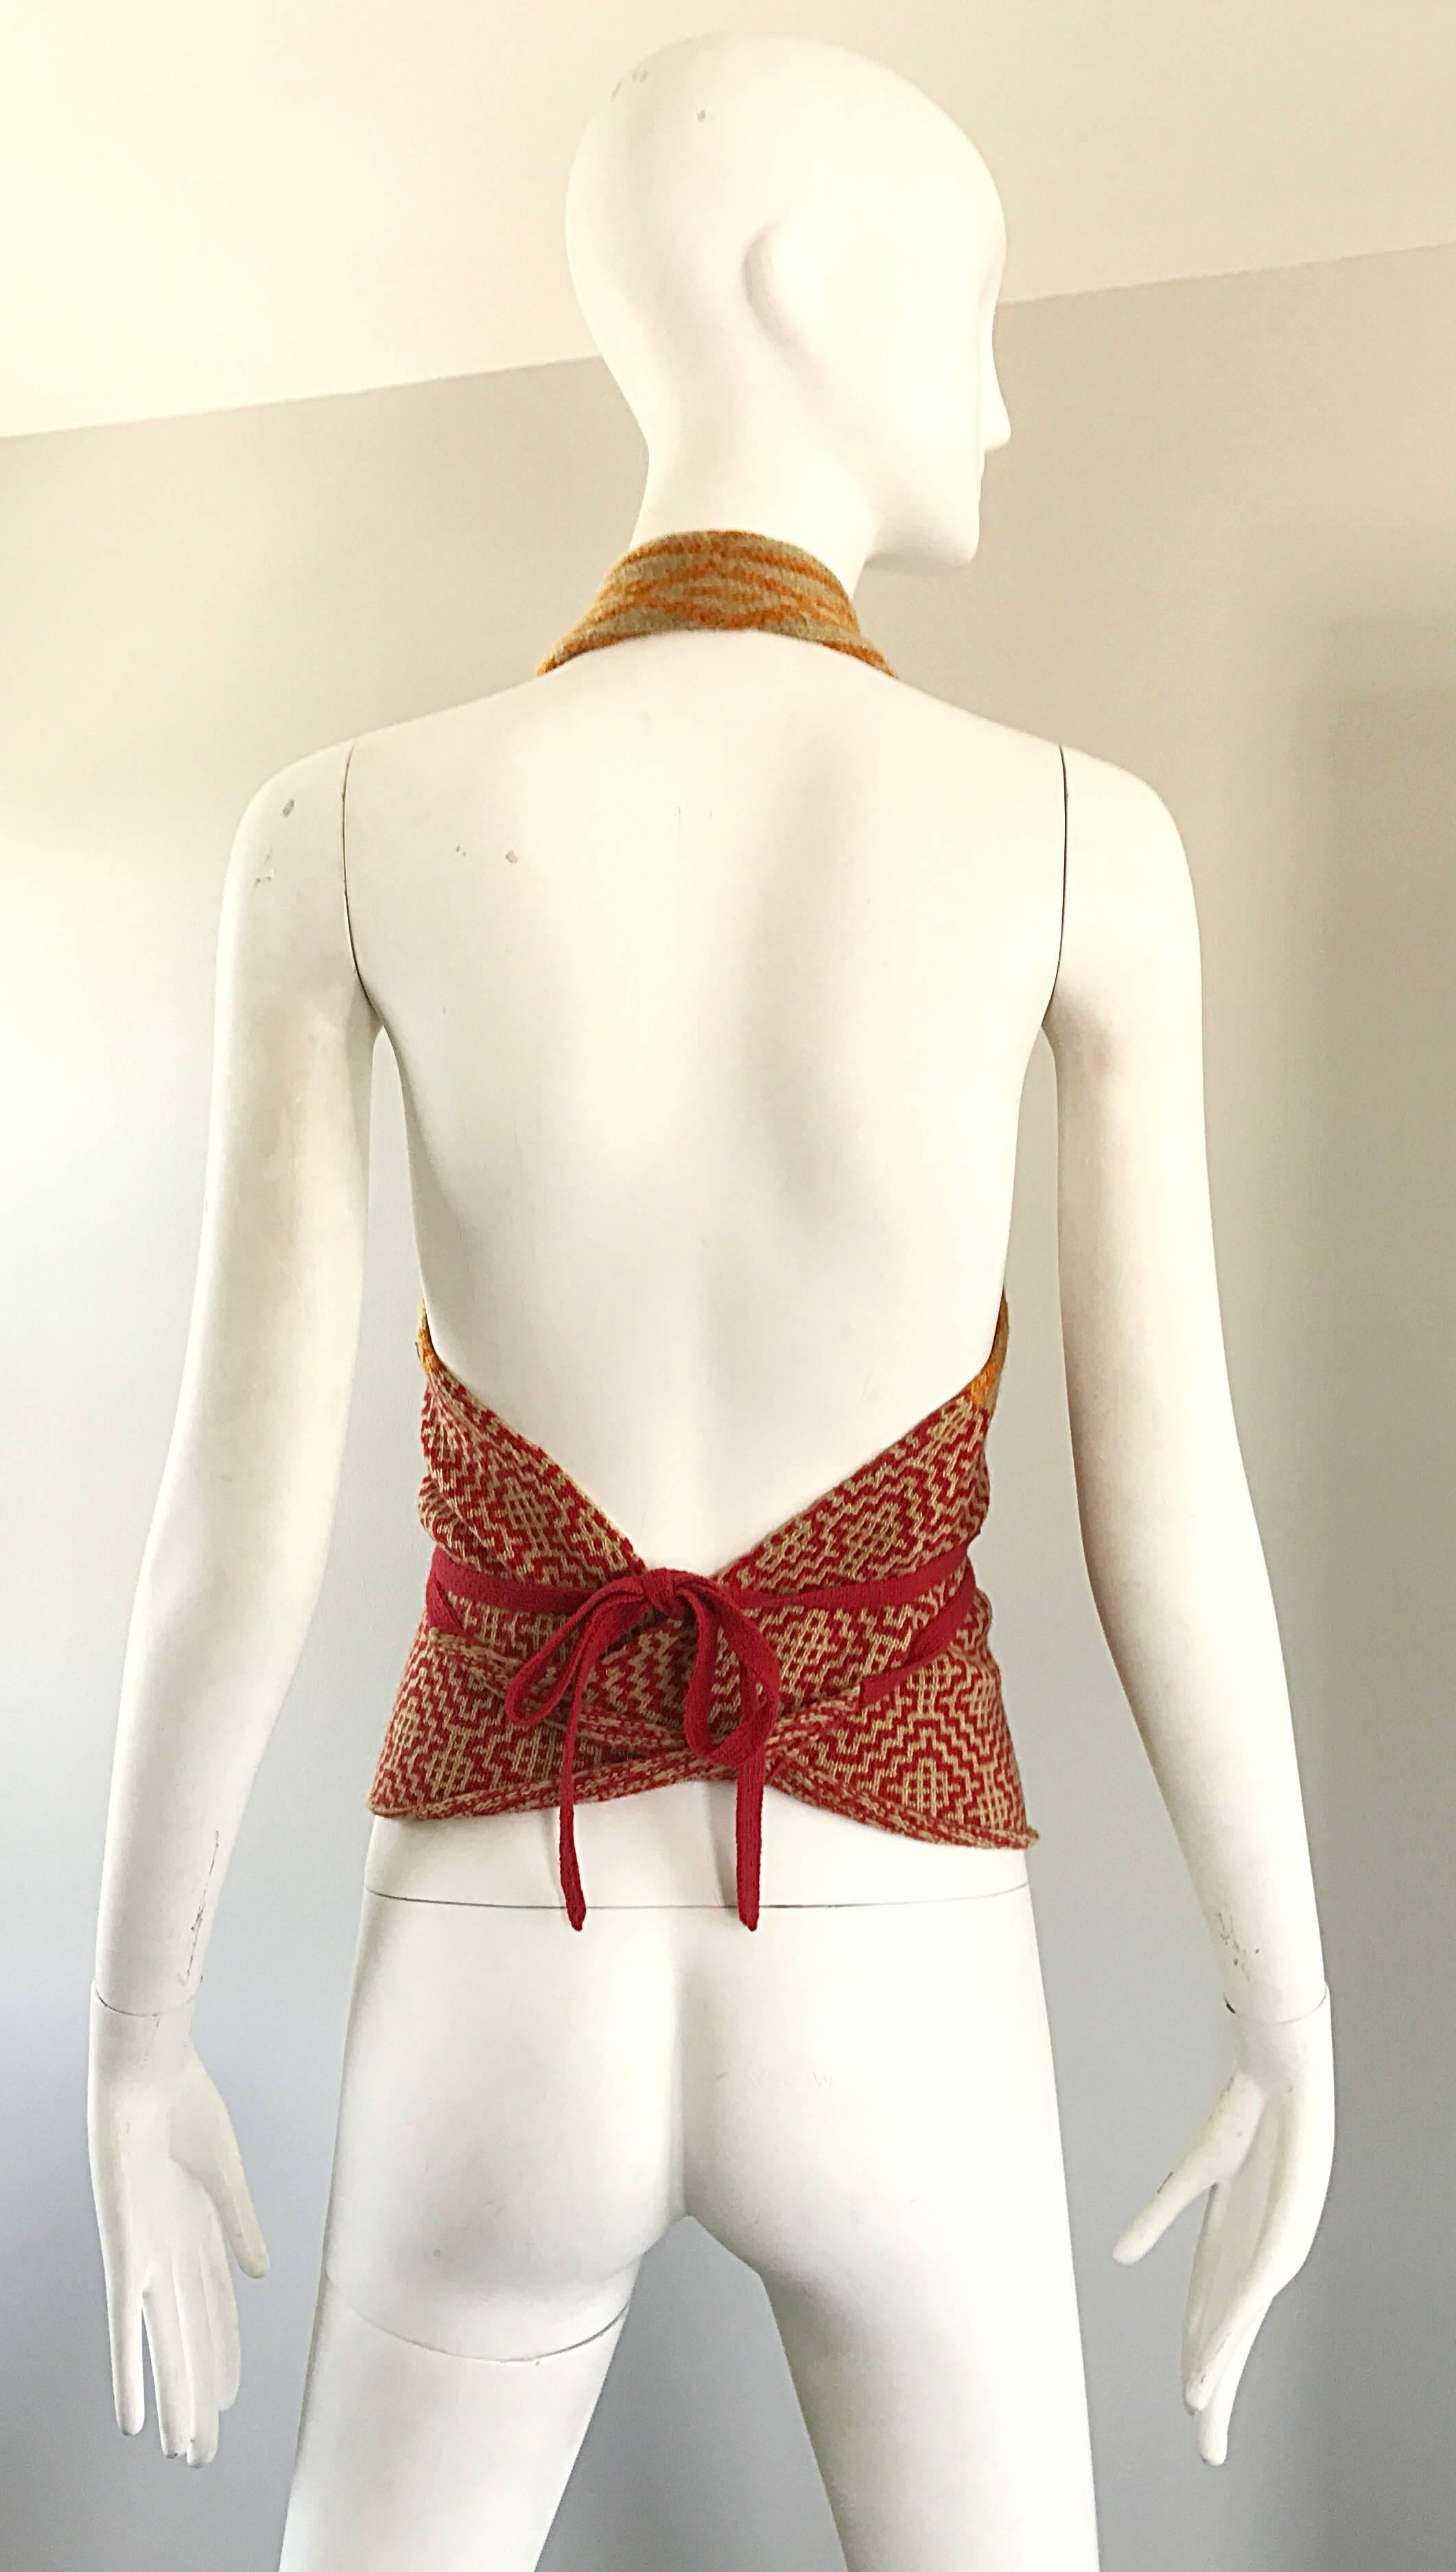 Chic and rare late 1990s DRIES VAN NOTEN wool beaded halter top! Features warm tones of red, gold, tan and marigold throughout. Ikat print in various shapes. Hundreds of hand-sewn seed beads on the bodice. Wrap around style ties shut at the waist.